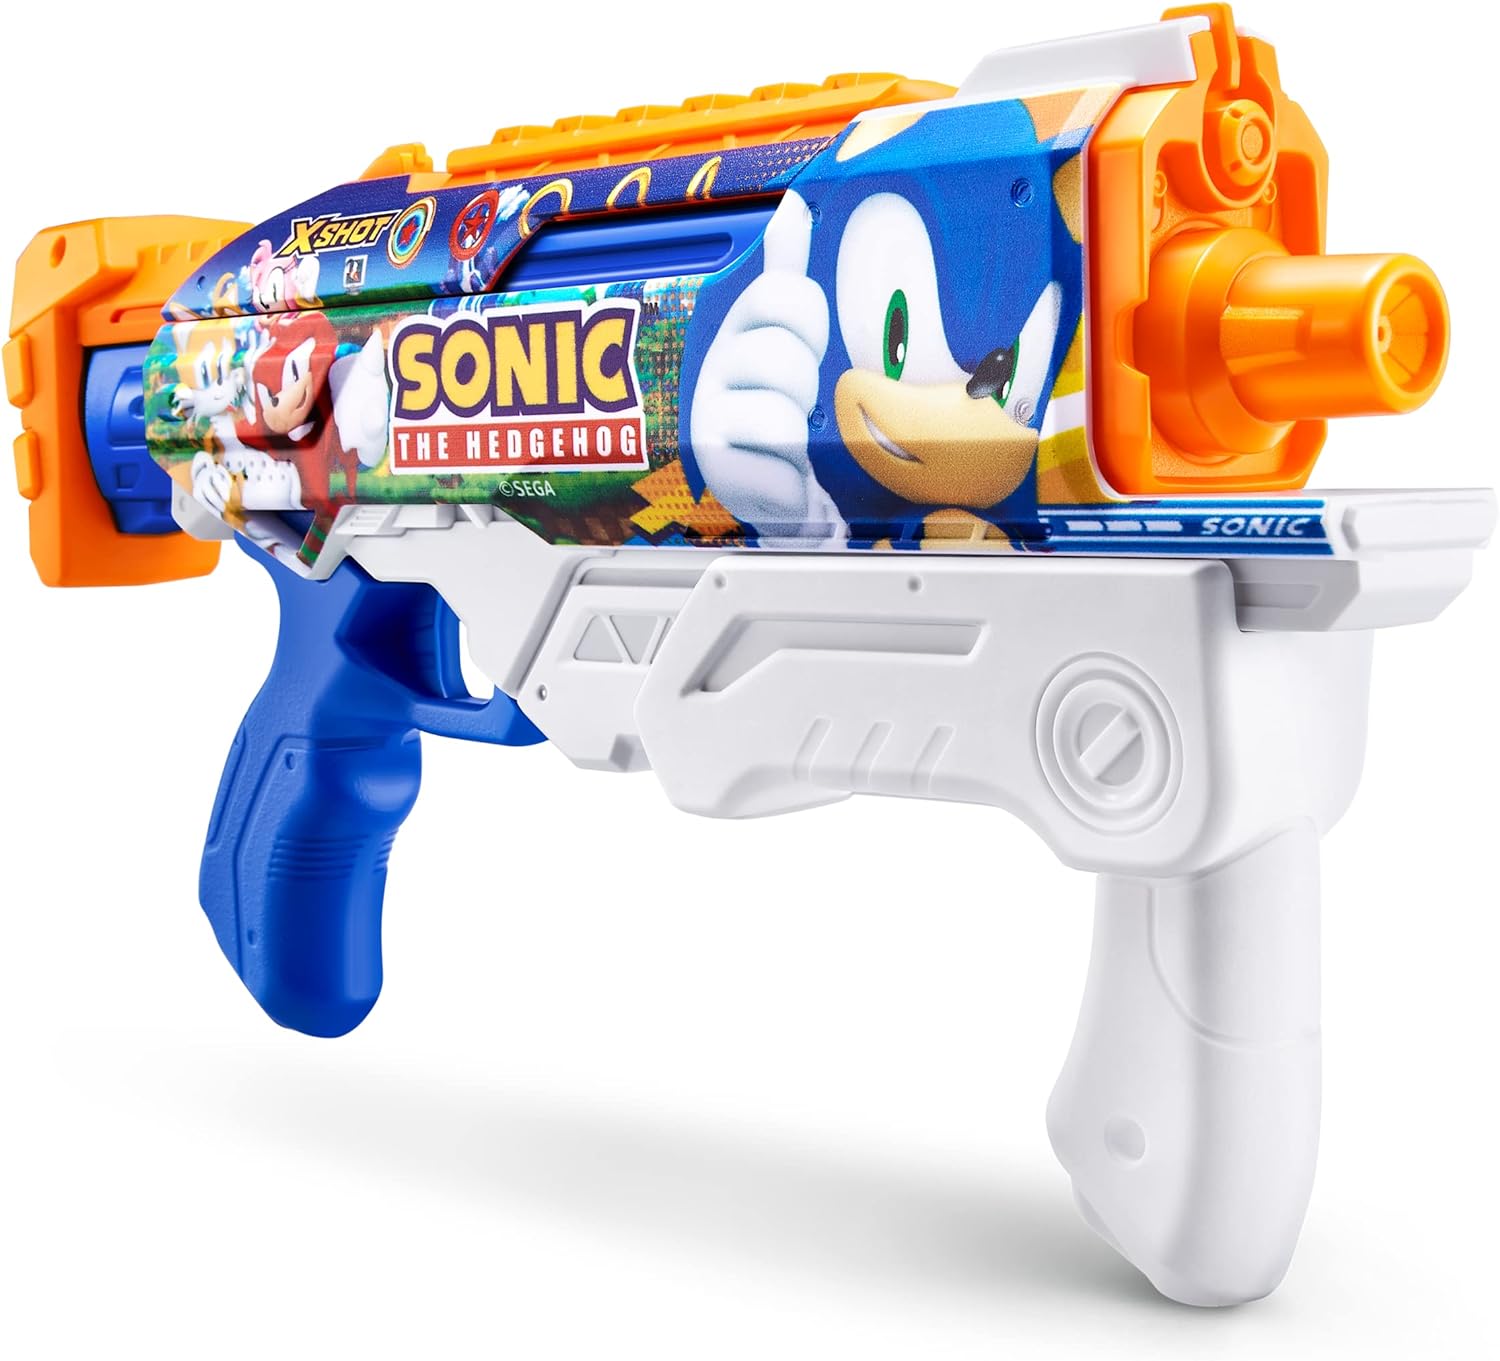 X-Shot Sonic Fast-Fill Hyperload Watergun, Water Blaster, Water Toys, 2 Blasters Total, Fills with Water in just 1 Second!